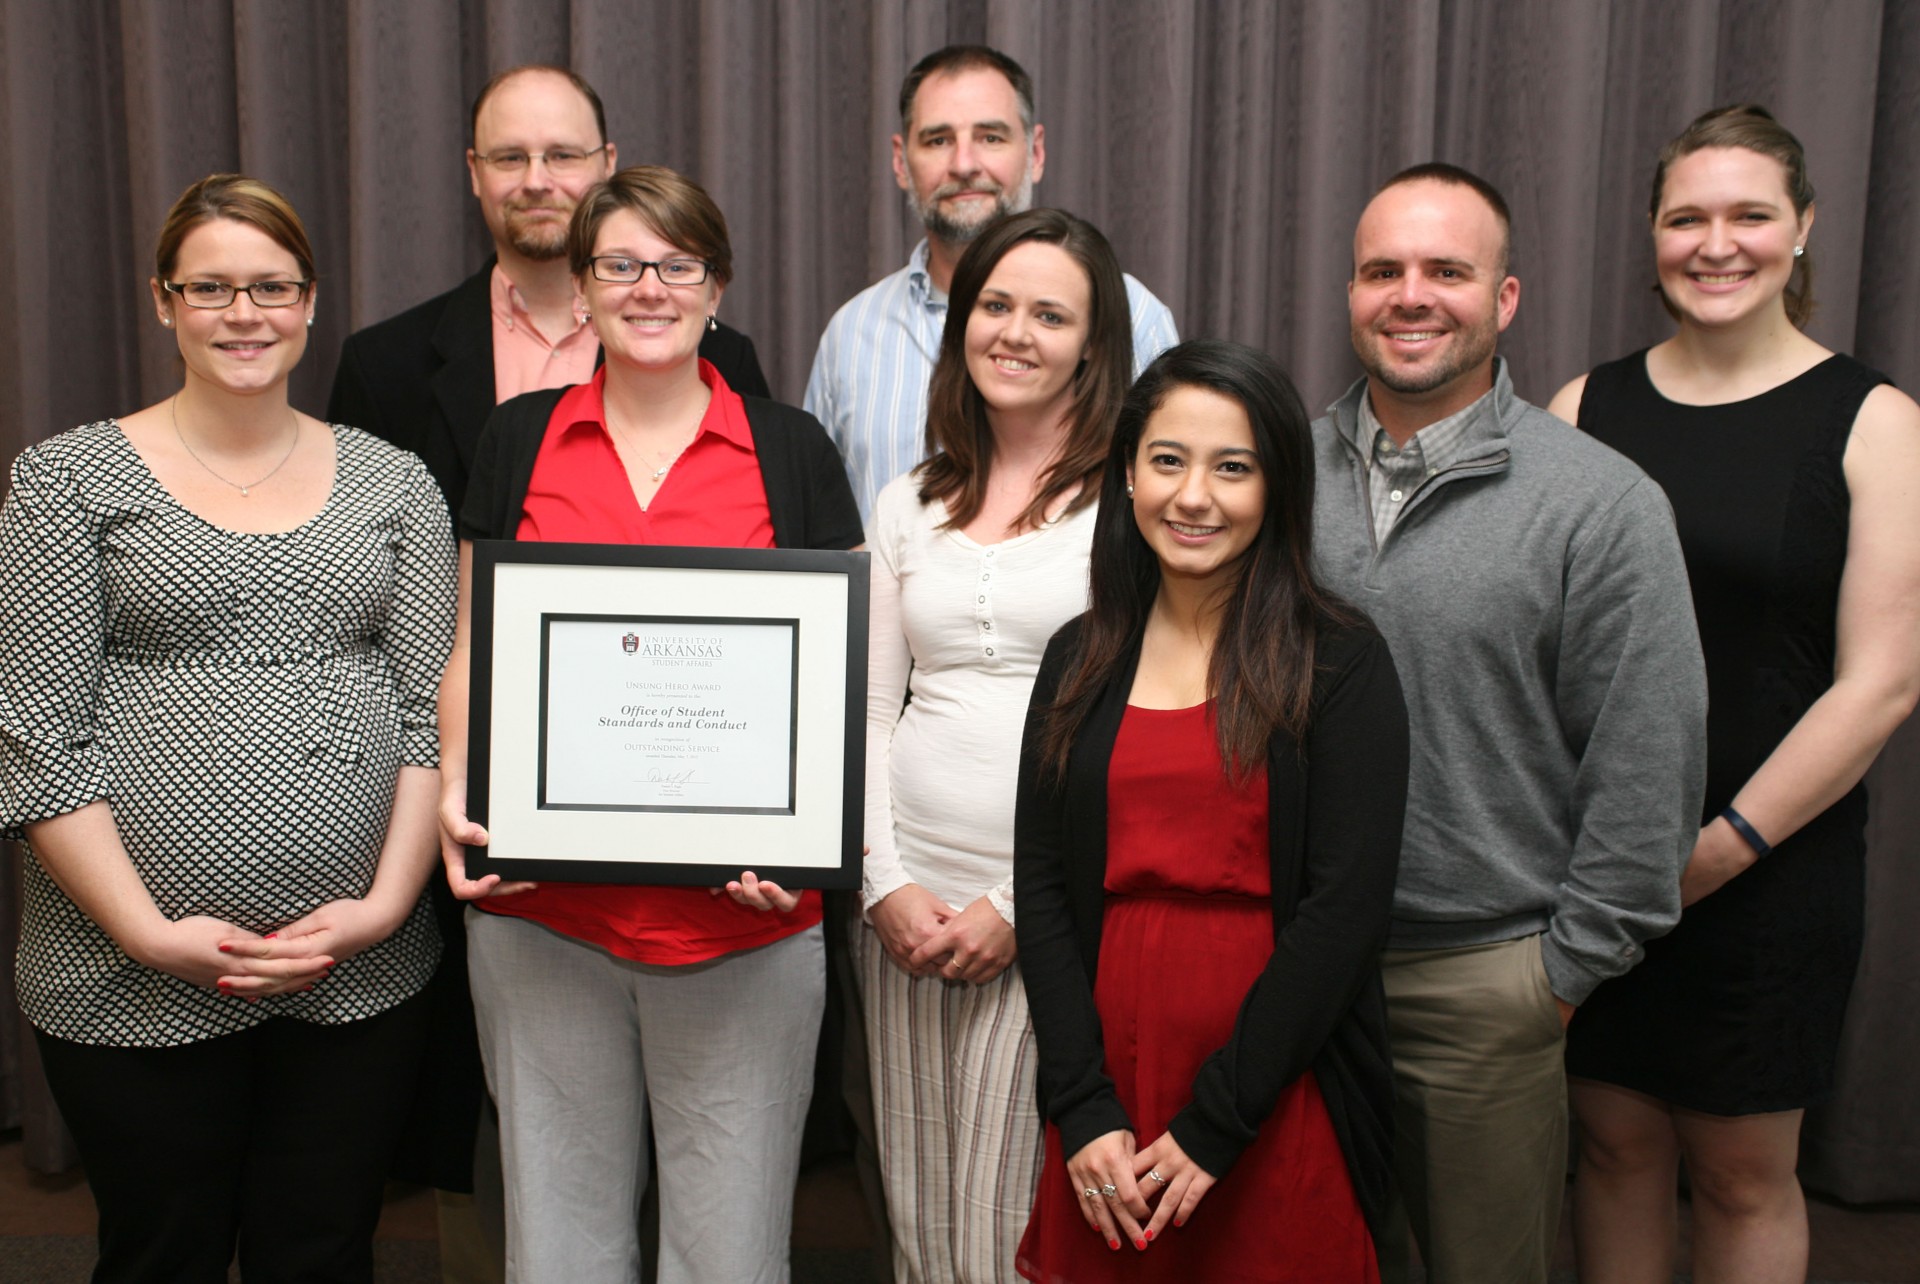 The Office of Student Standards and Conduct received the Unsung Hero Award.